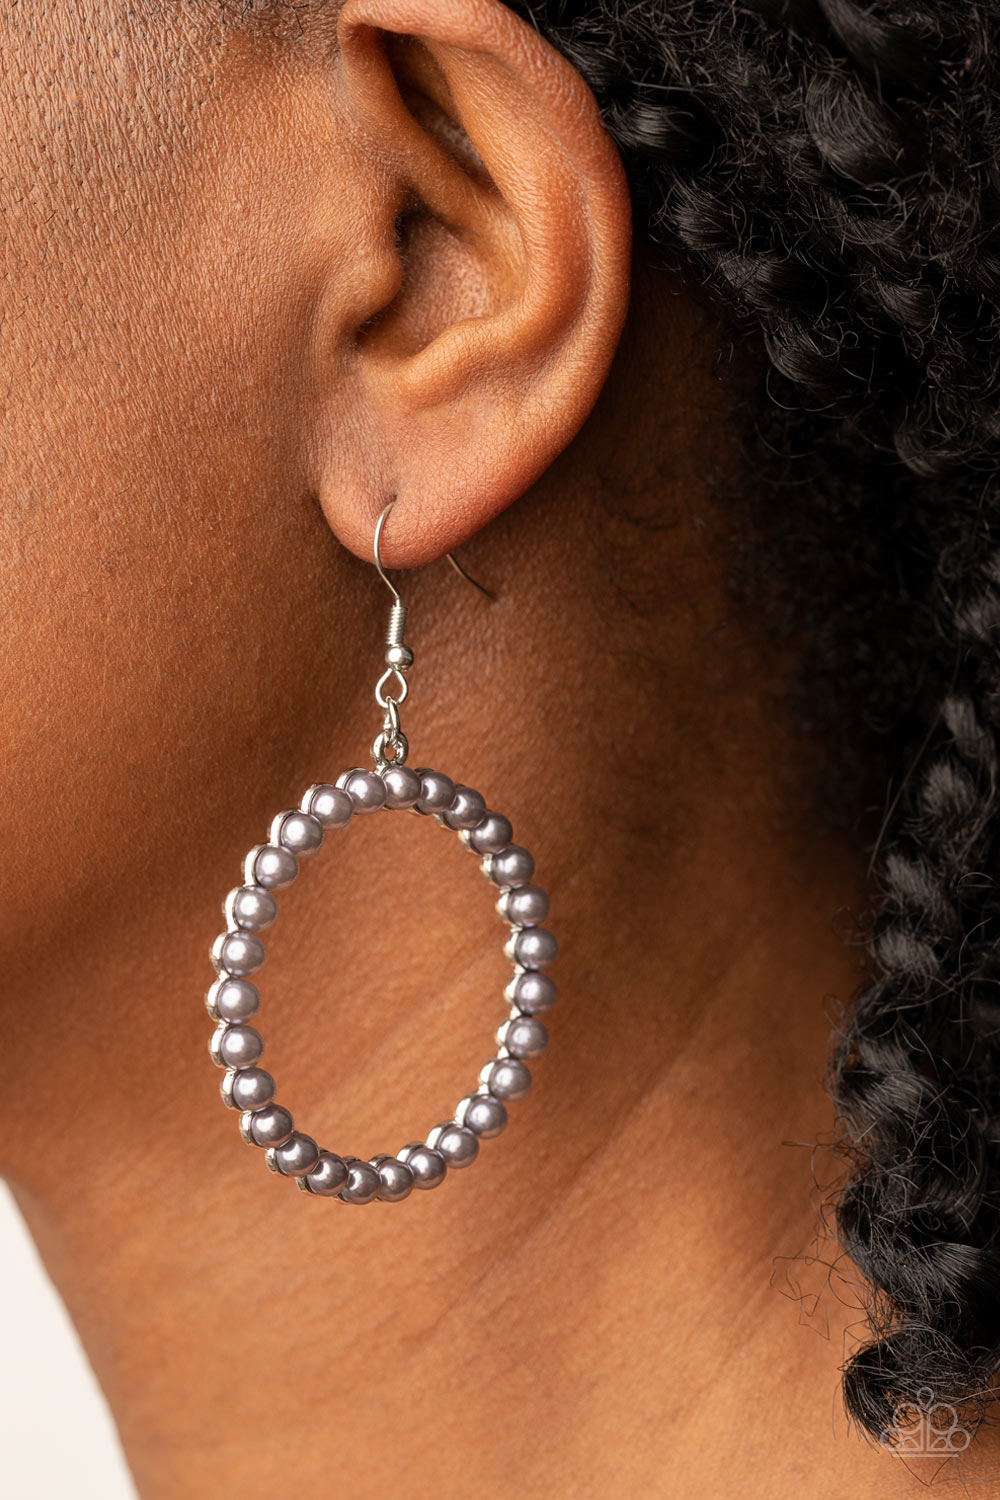 Can I Get a Hallelujah - Silver Earrings - Paparazzi Accessories